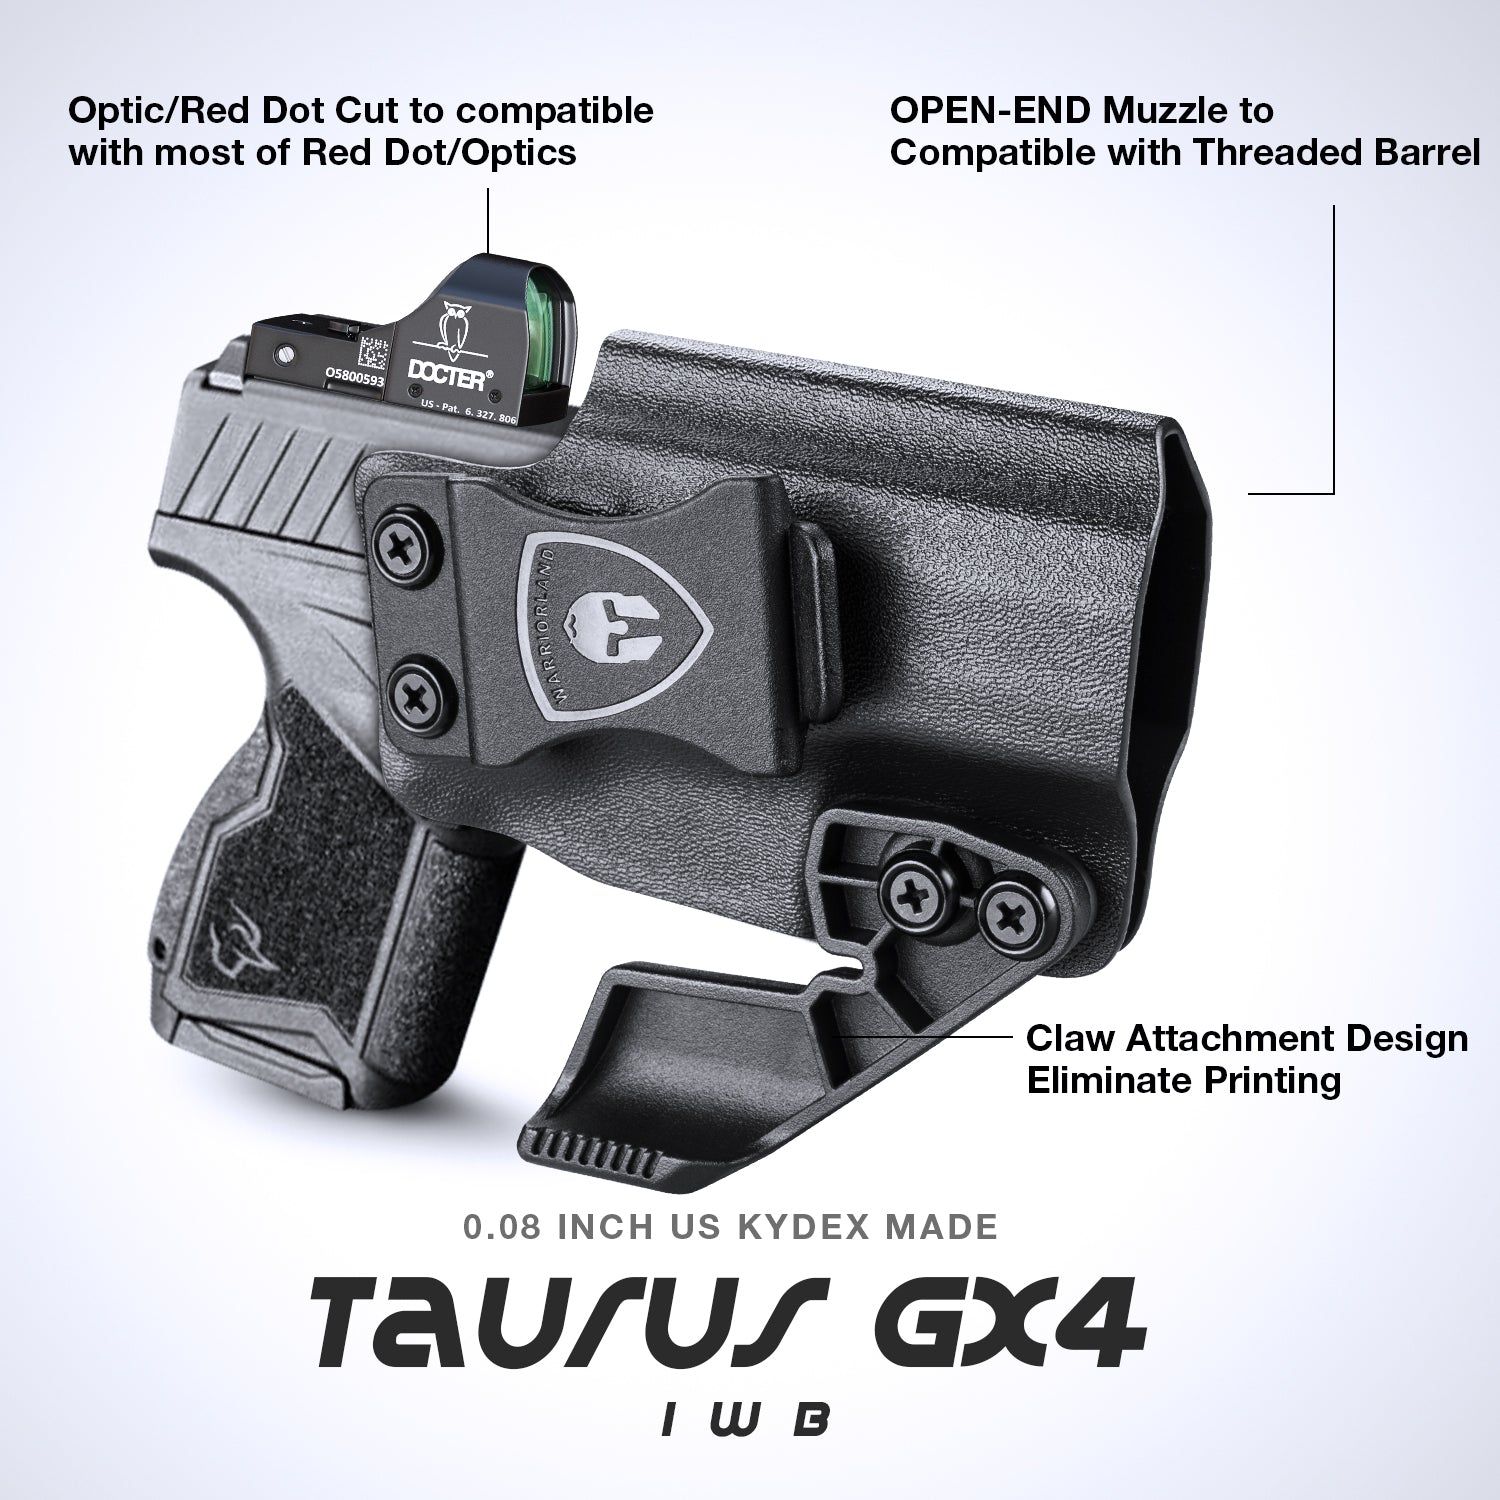 Taurus GX4 IWB Kydex Holster with Claw Red Dot Optics Cut Trigger Guard Holsters for Fat Guys | WARRIORLAND